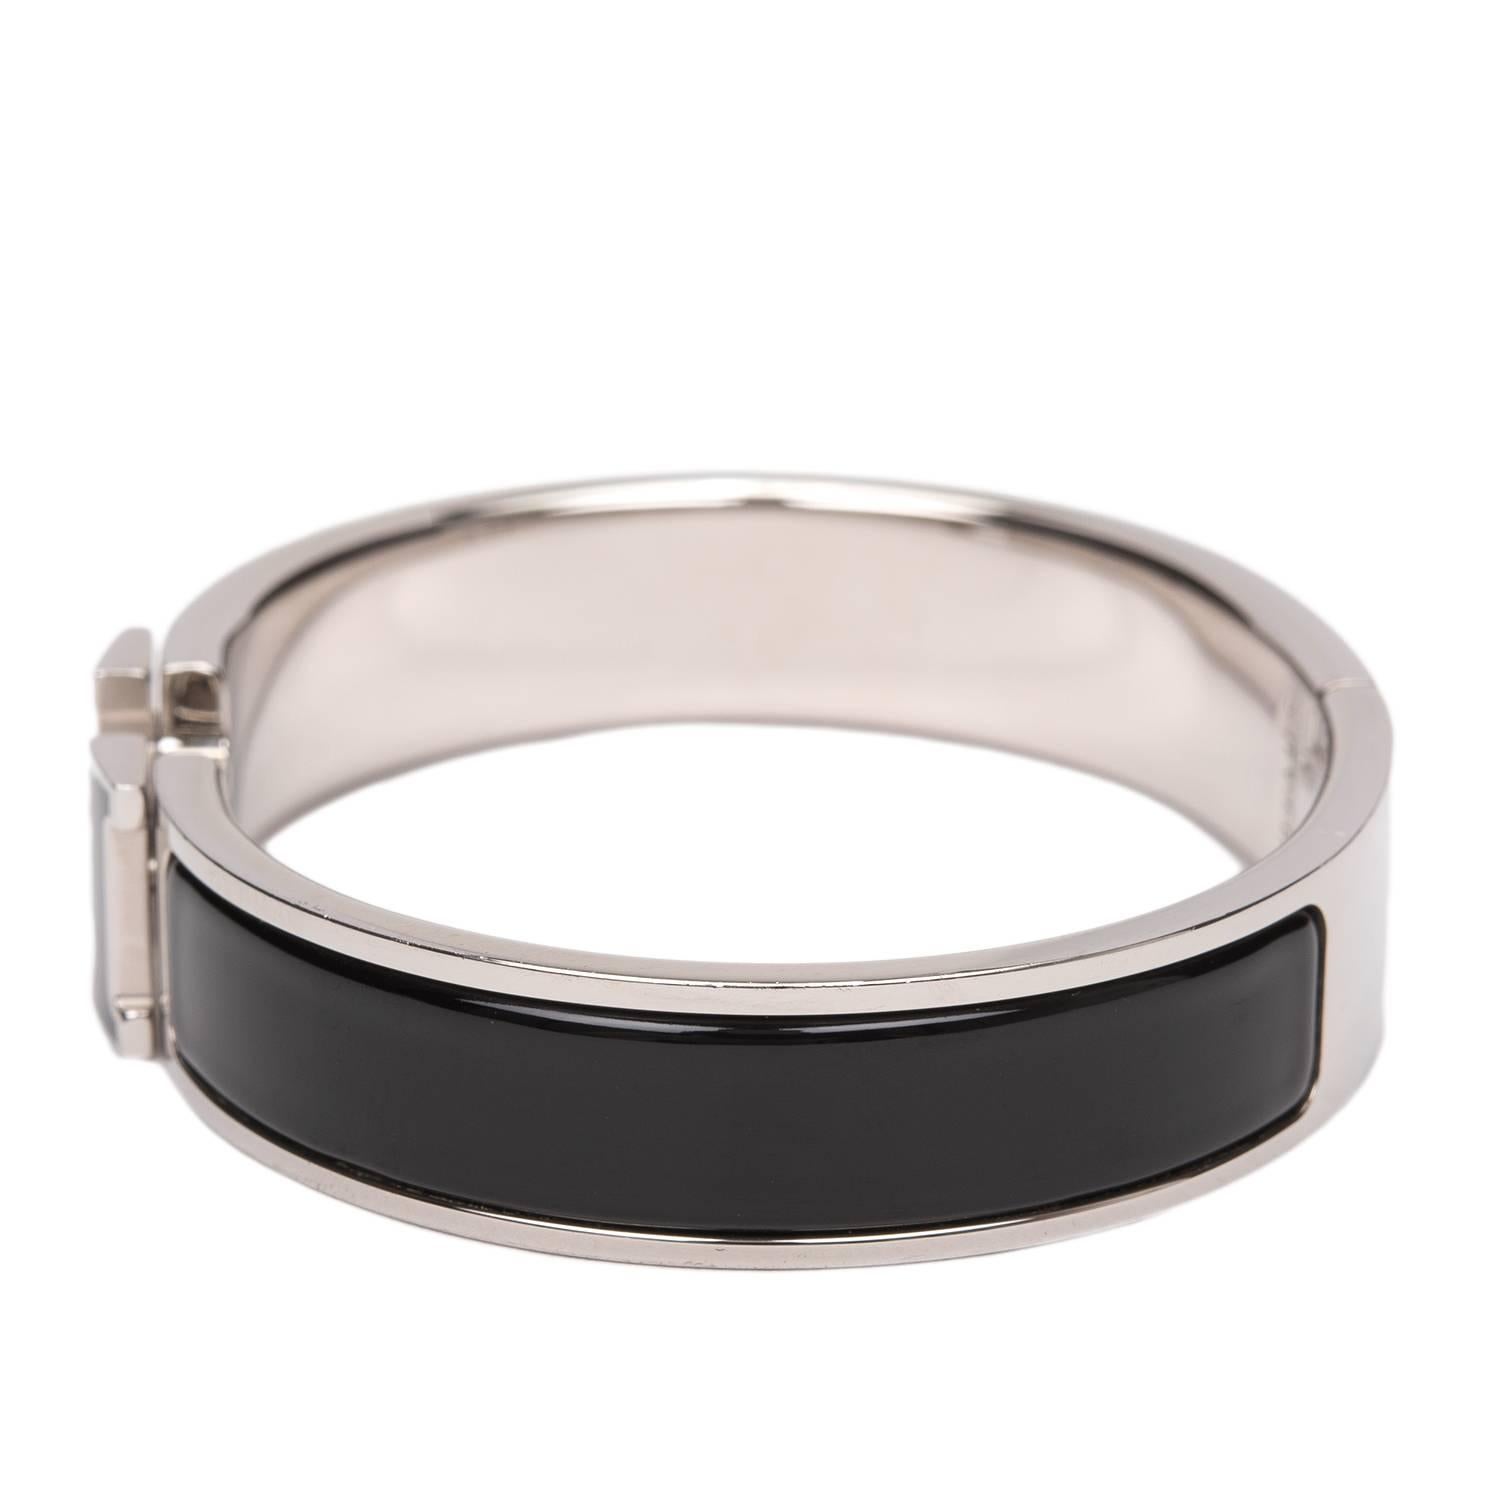 Hermes narrow Clic Clac H bracelet in Black/Black enamel with palladium plated hardware in size PM.

Origin: France

Condition: Mint; minor scratches only seen on close inspection

Accompanied by: Hermes box, dustbag

Measurements: Diameter: